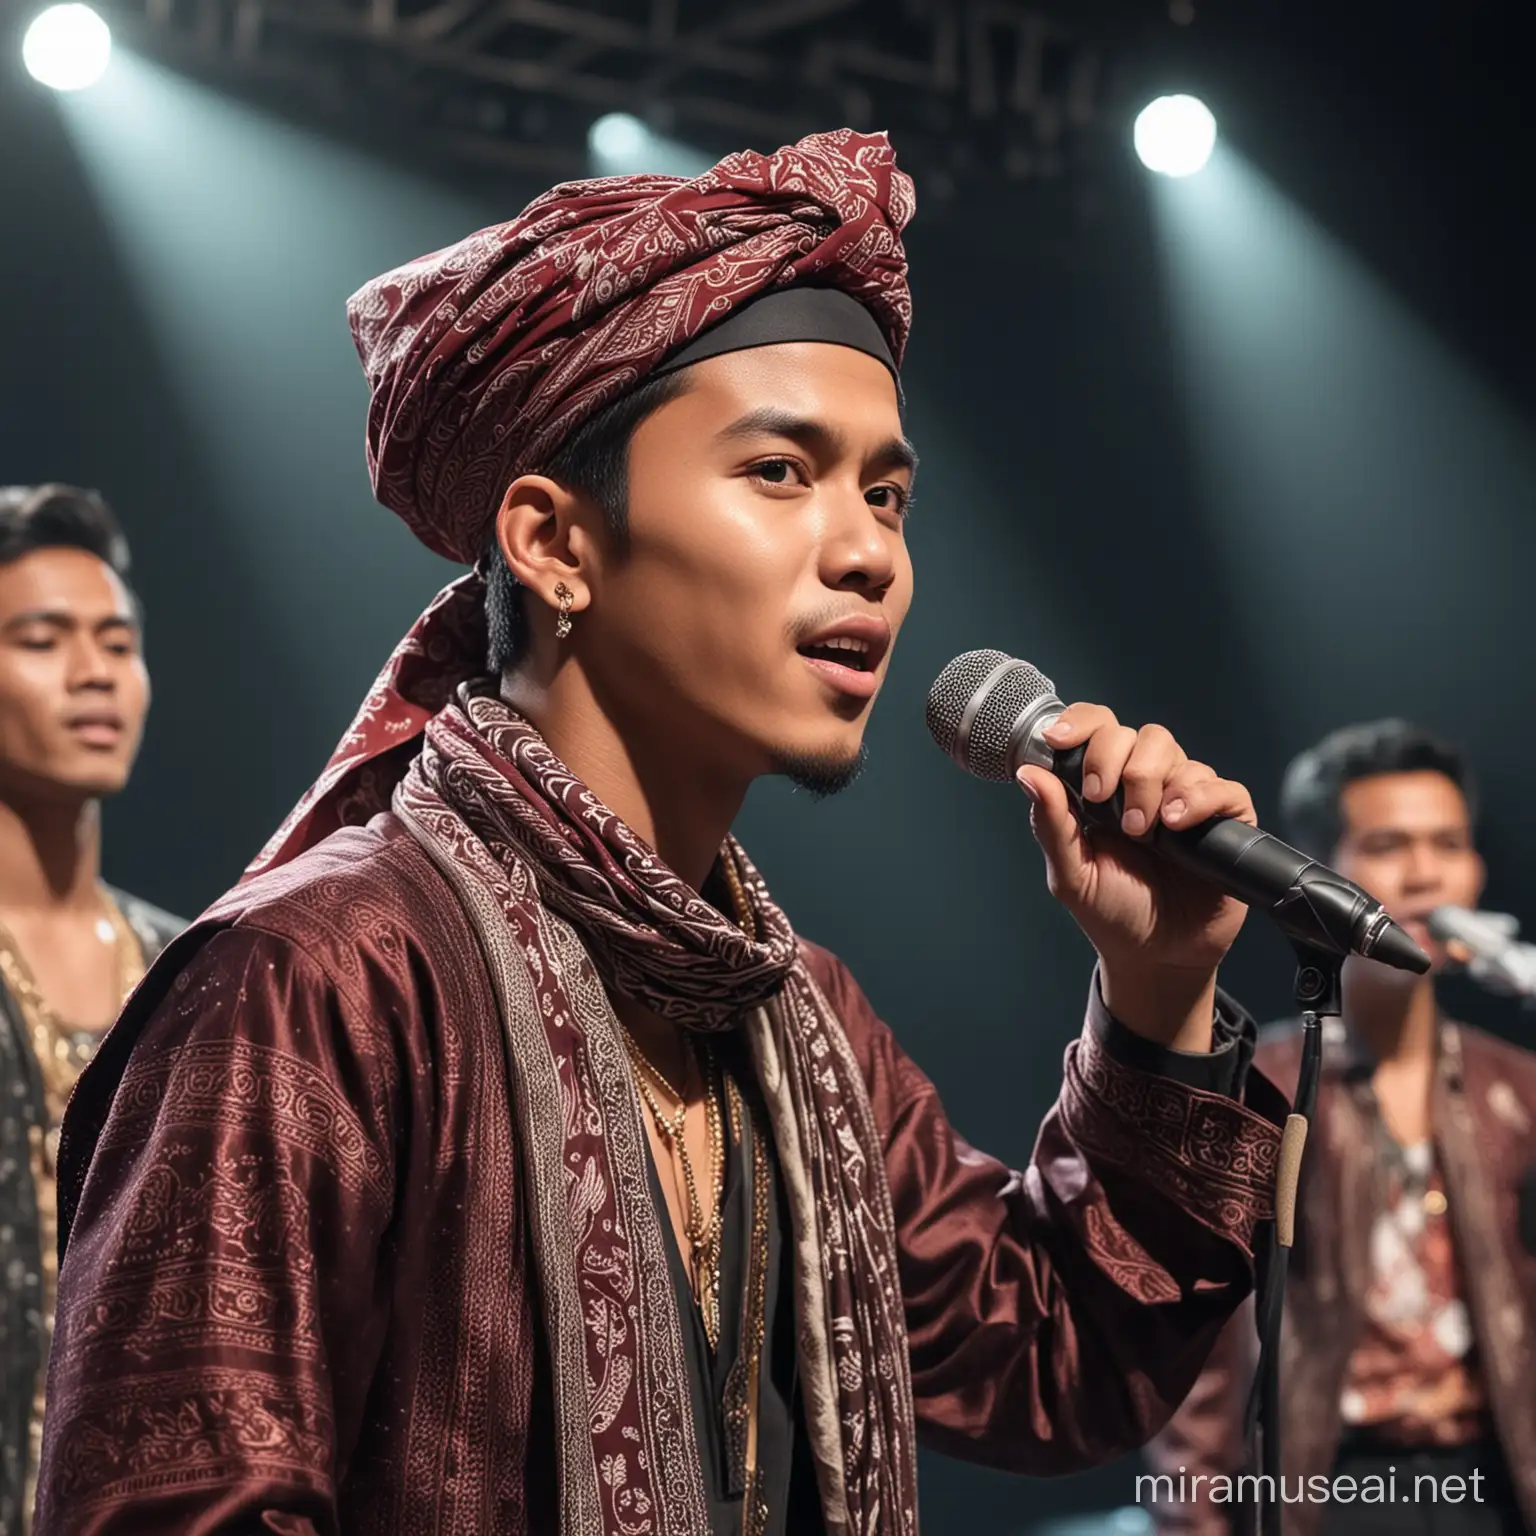 Luxurious Indonesian Male Singer Performing on Lavish Stage with Full Band Accompaniment